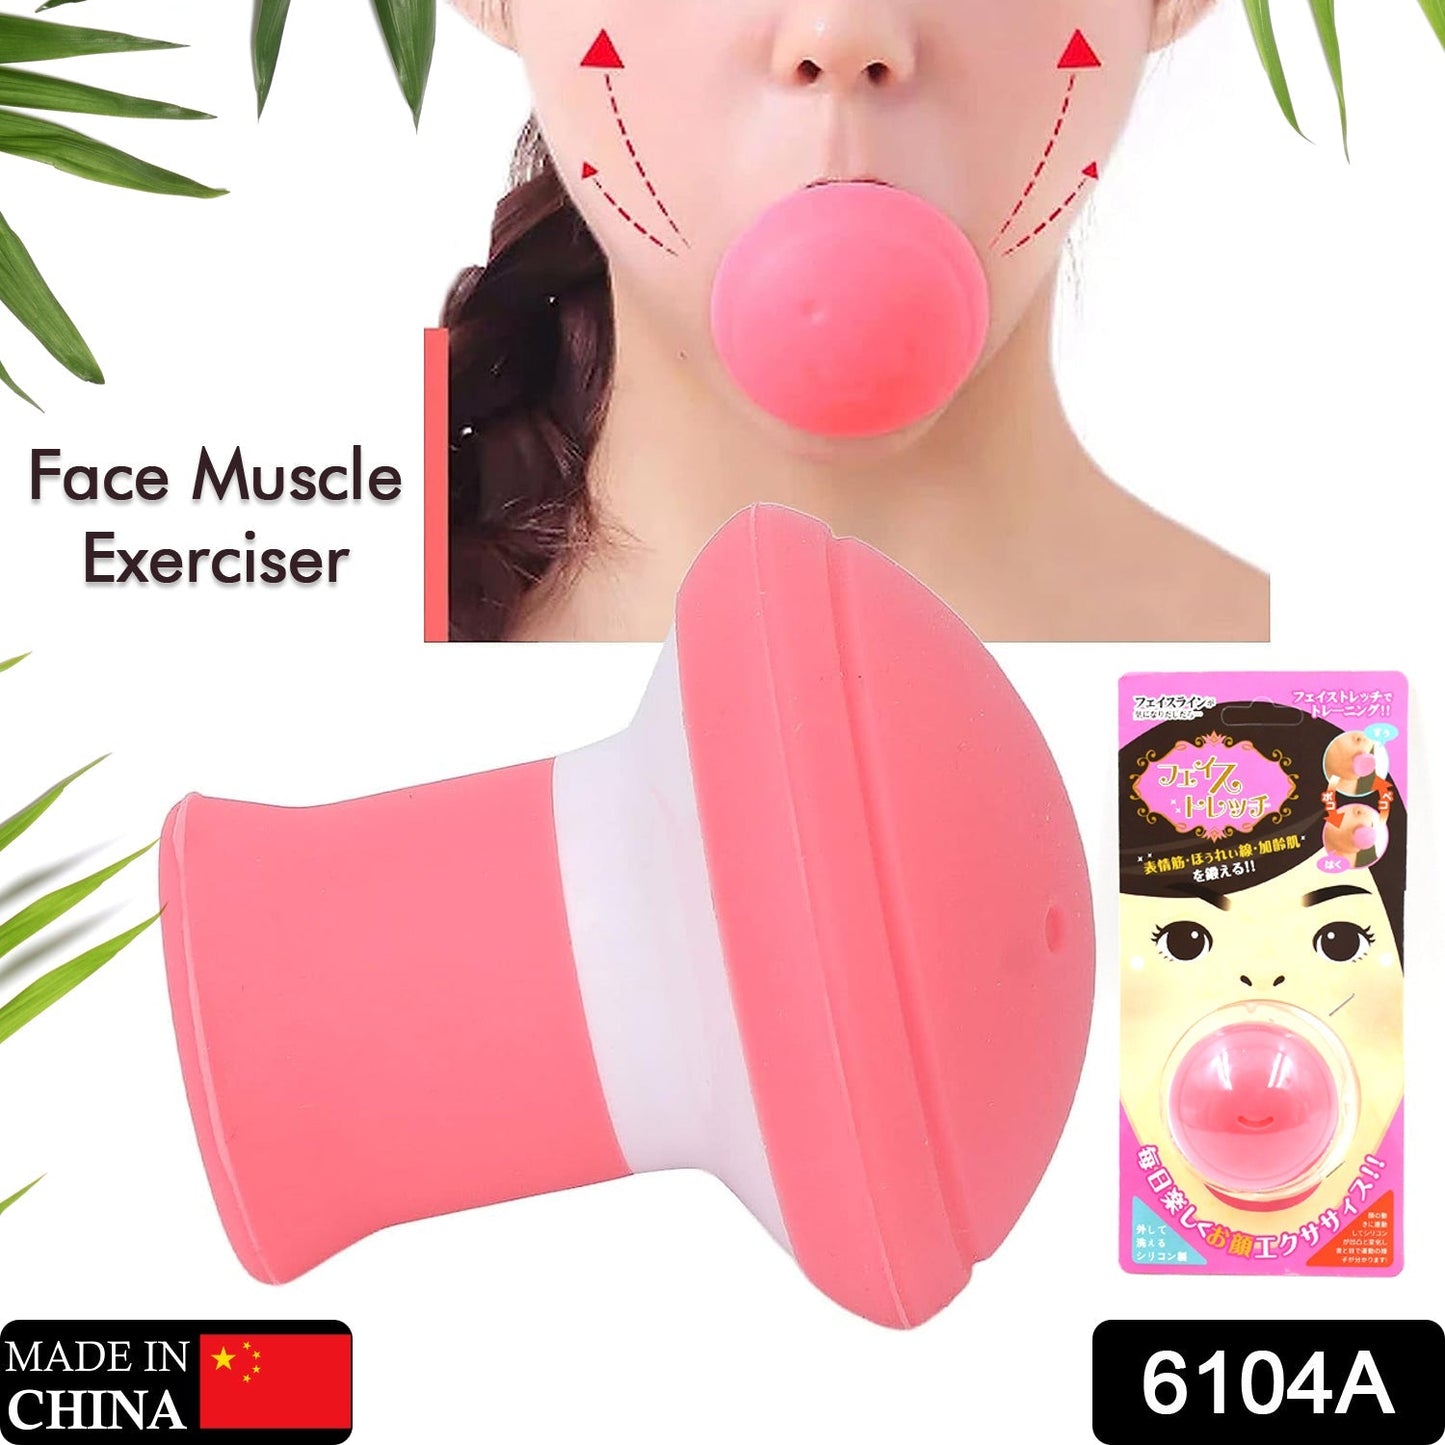 Silicone Facial Jaw Exerciser Breathing Type Face Slimmer, Breathing Type Face Slimmer Face Lift Inhaling & Exhaling Tool, Look Younger And Healthier - Helps Reduce Stress And Cravings (Card Packing)